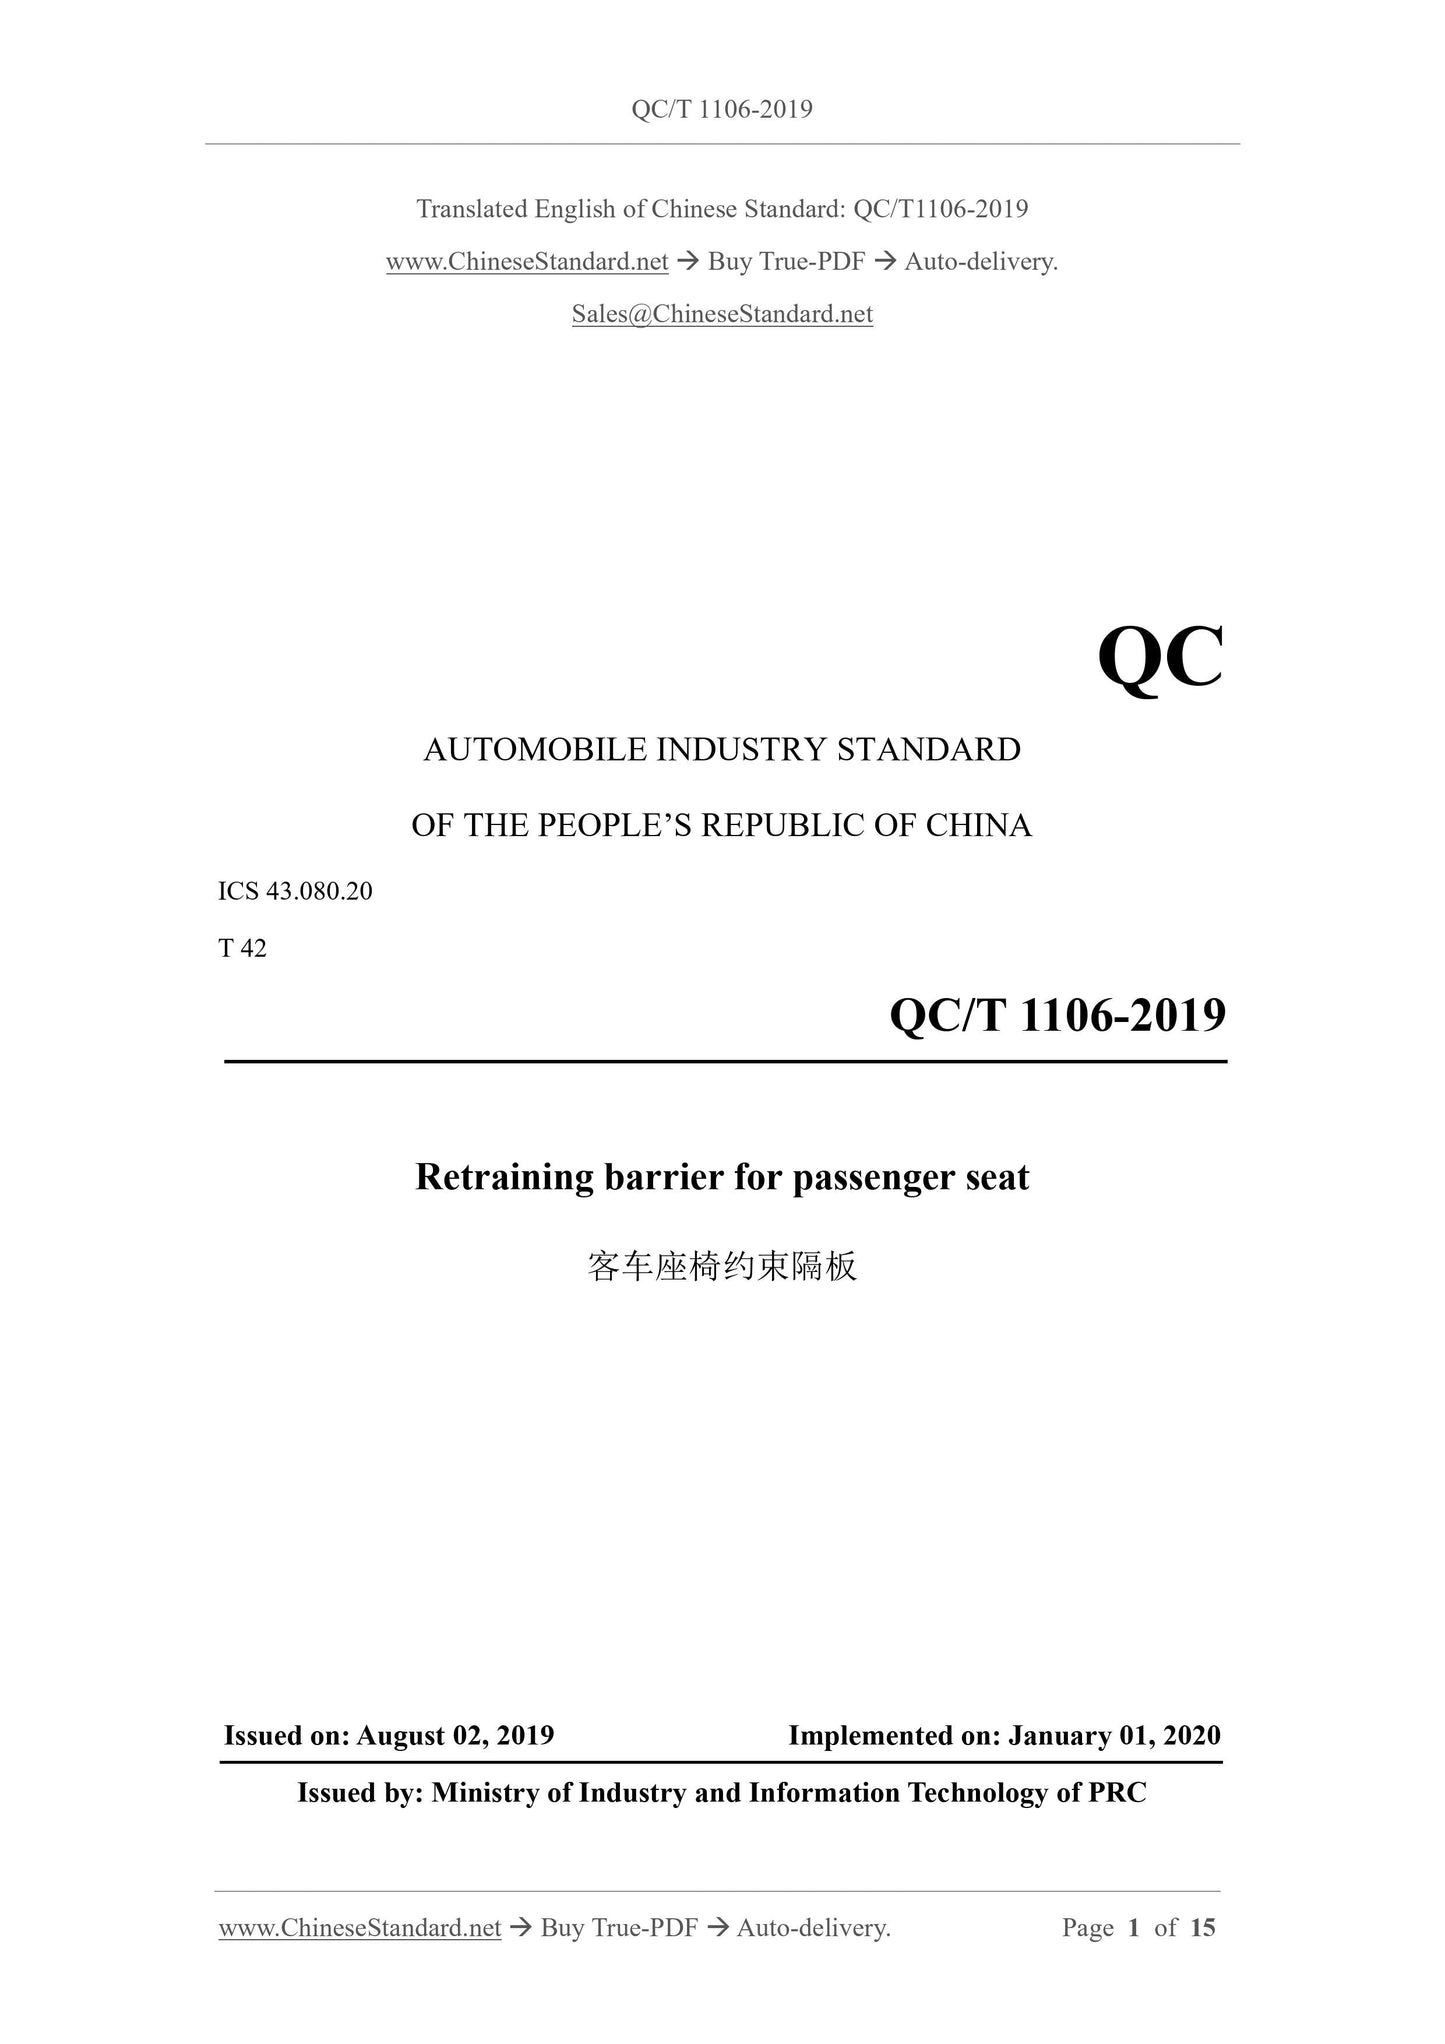 QC/T 1106-2019 Page 1